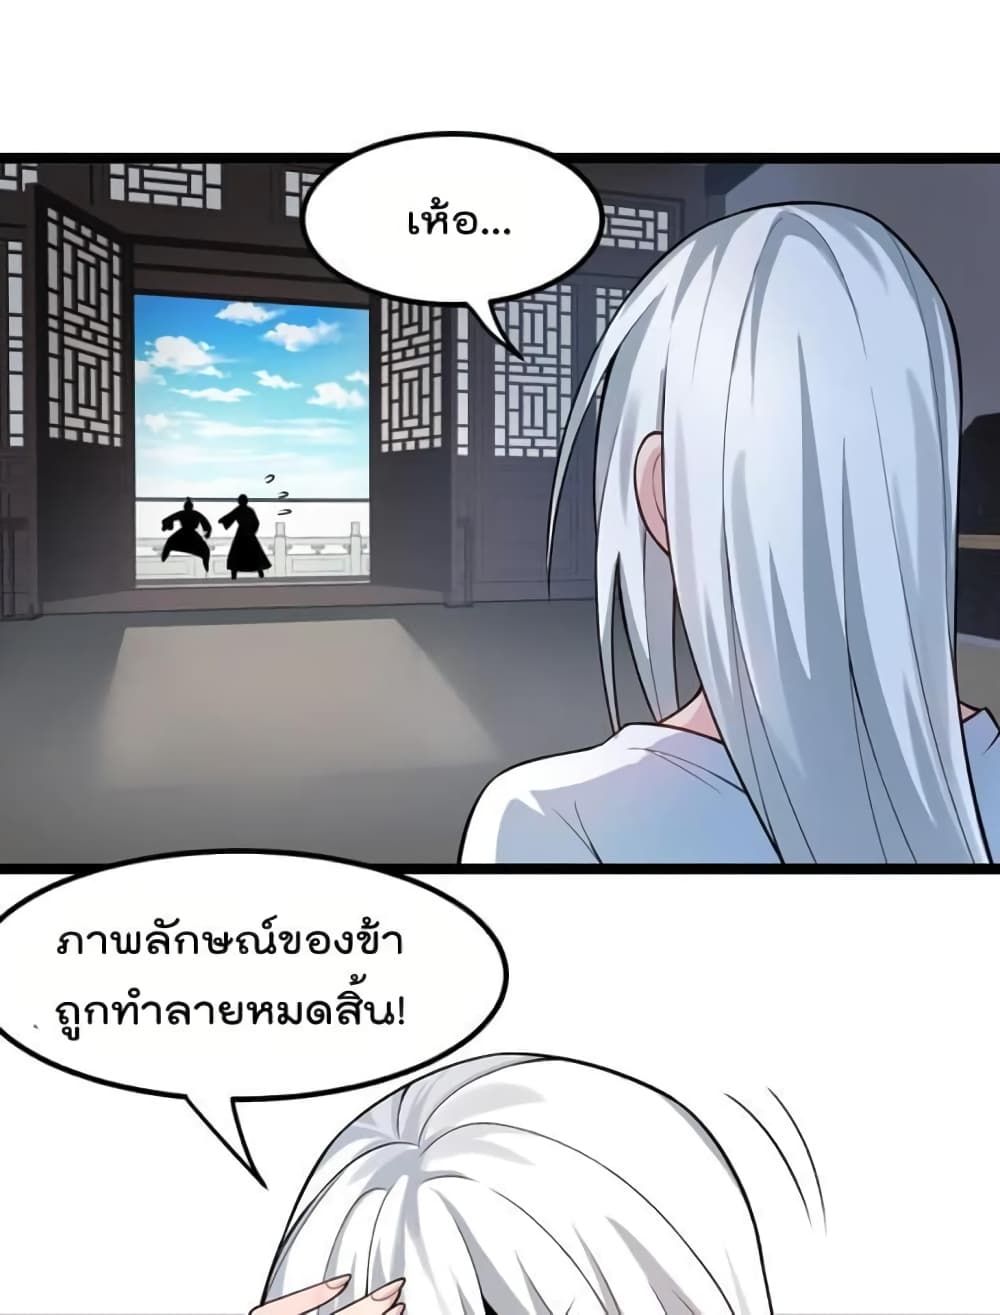 Godsian Masian from Another World ตอนที่ 121 (16)